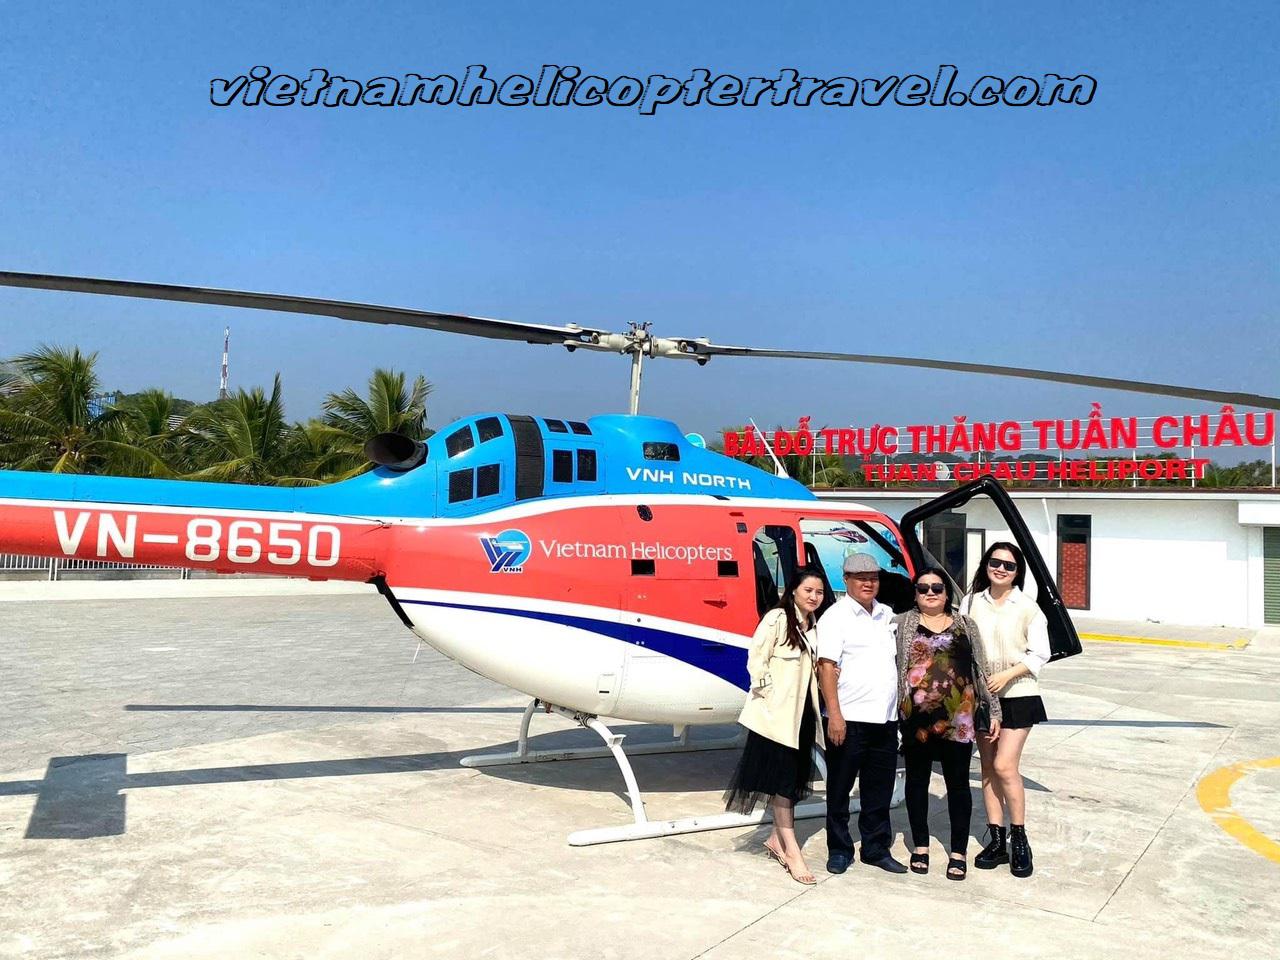 Experience Ha Long Bay Helicopter Tour